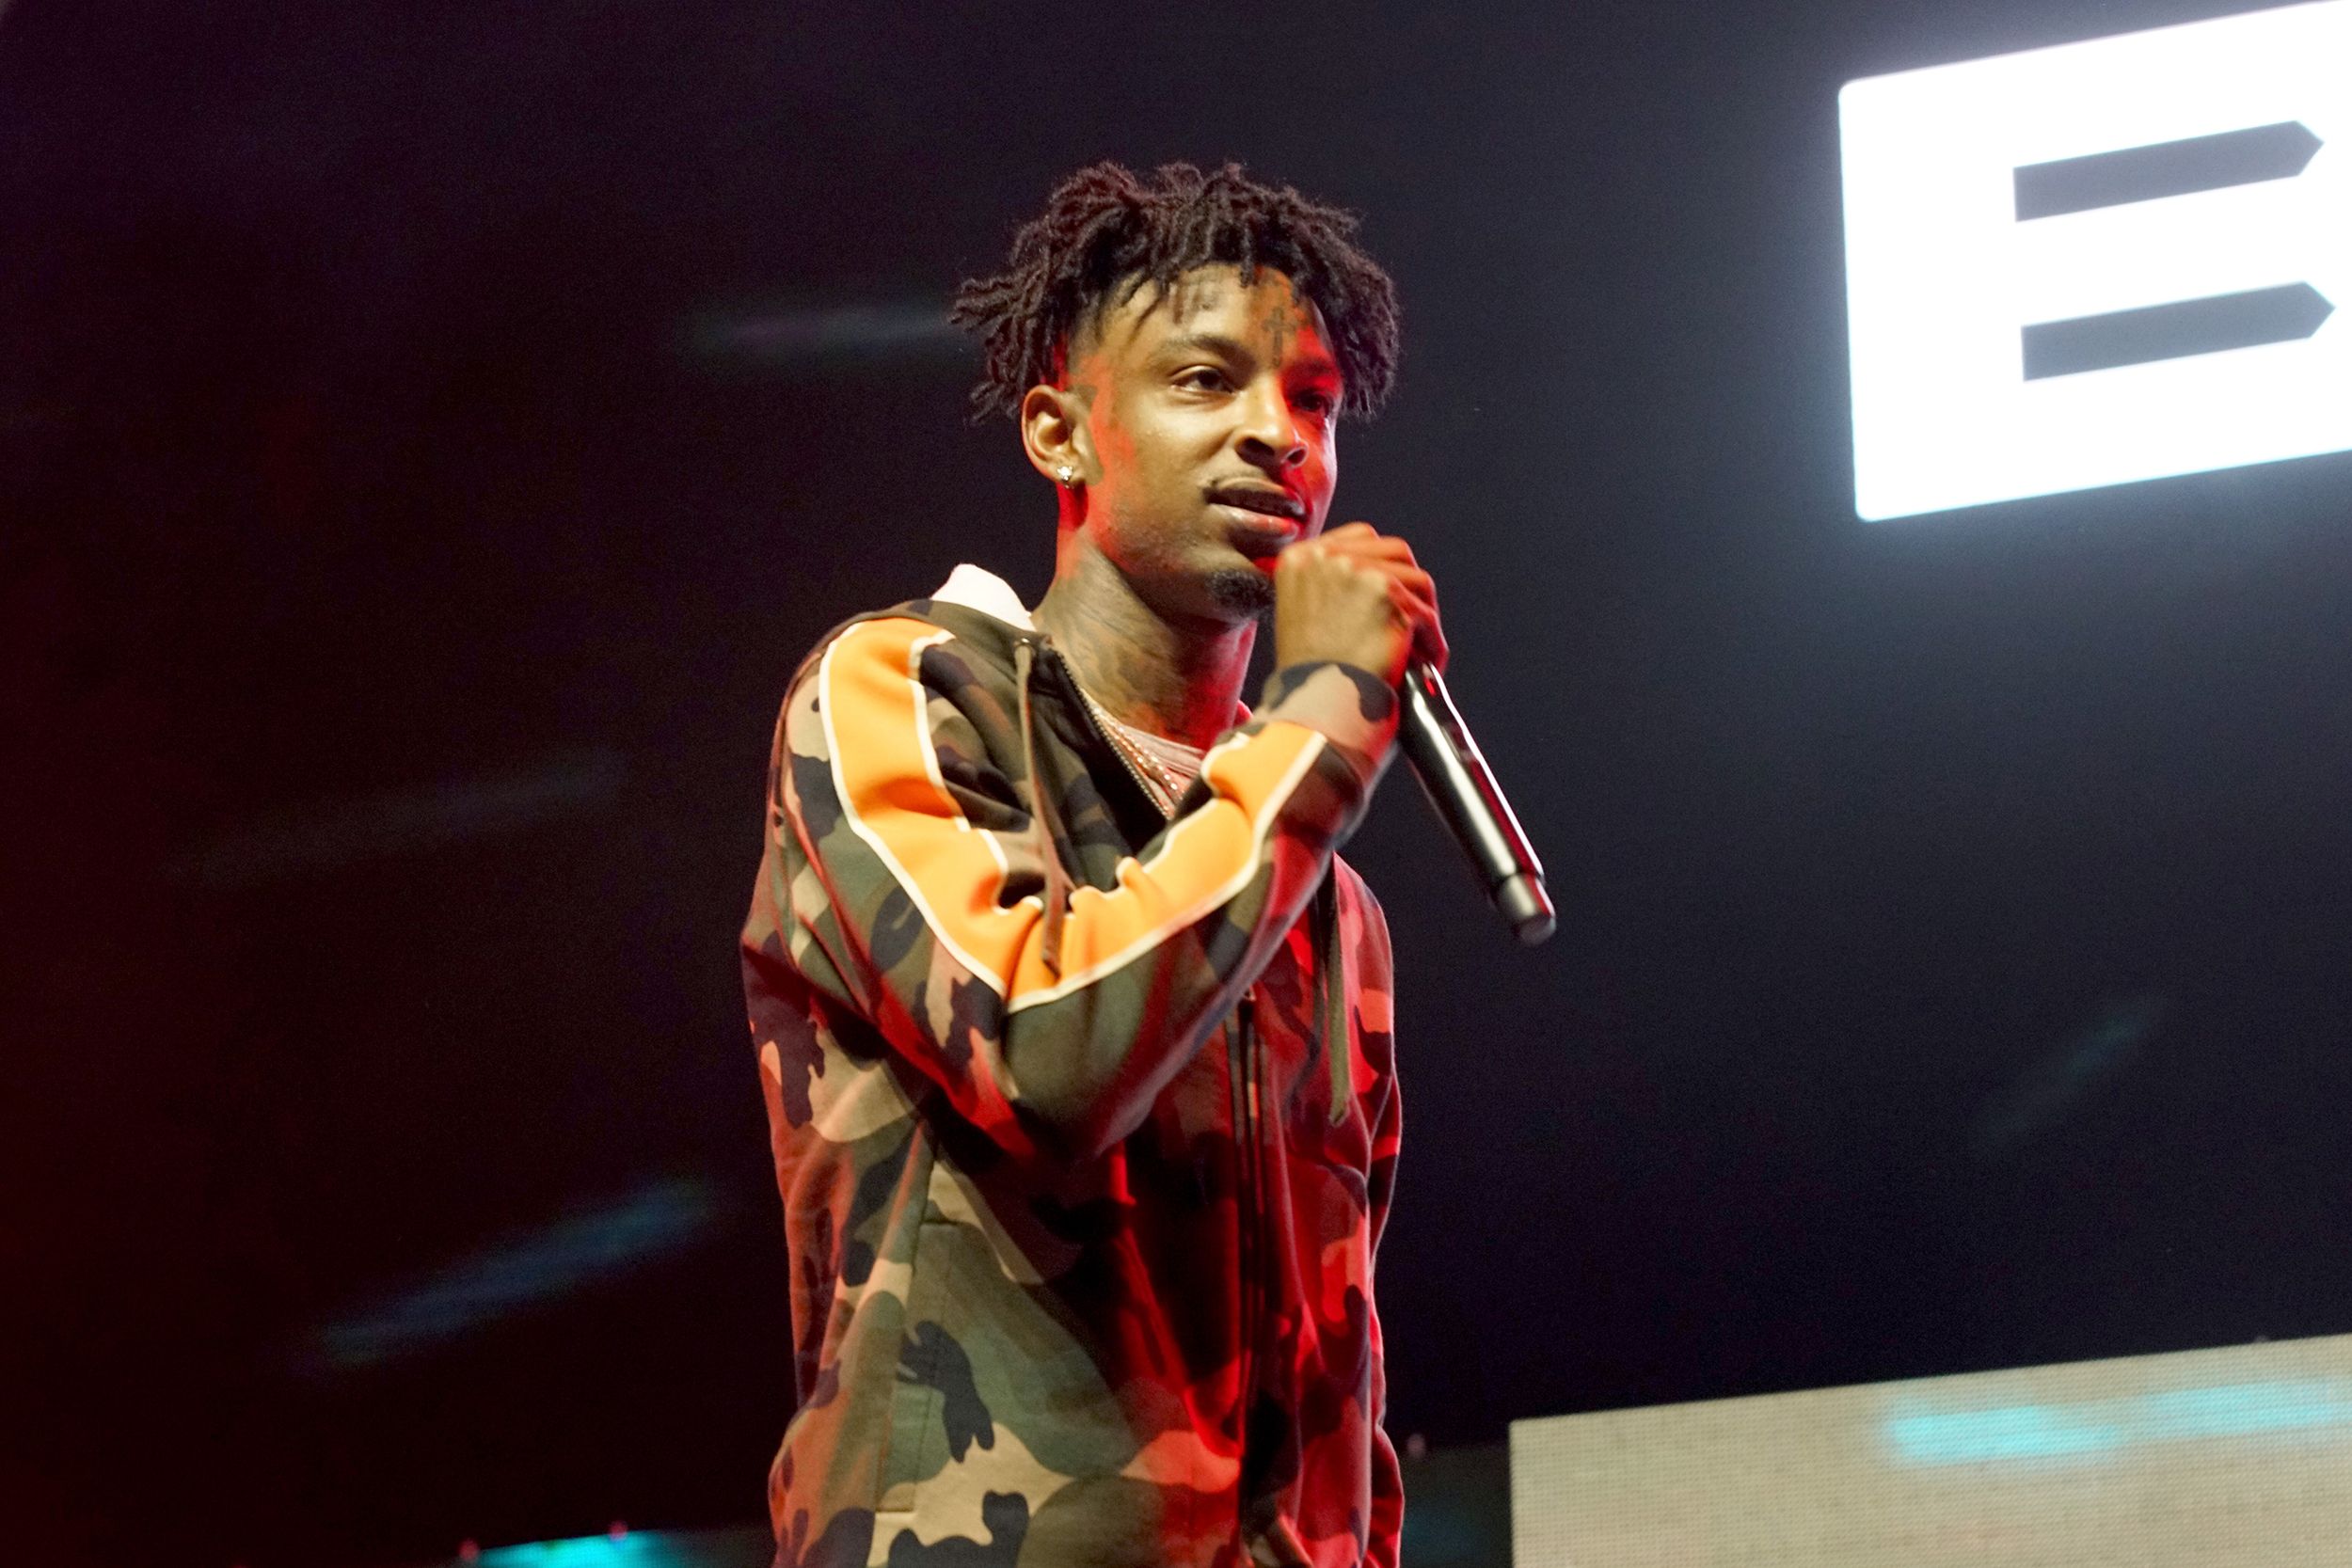 21 Savage is released from jail on $500K bond after eight months in custody following January racketeering arrest